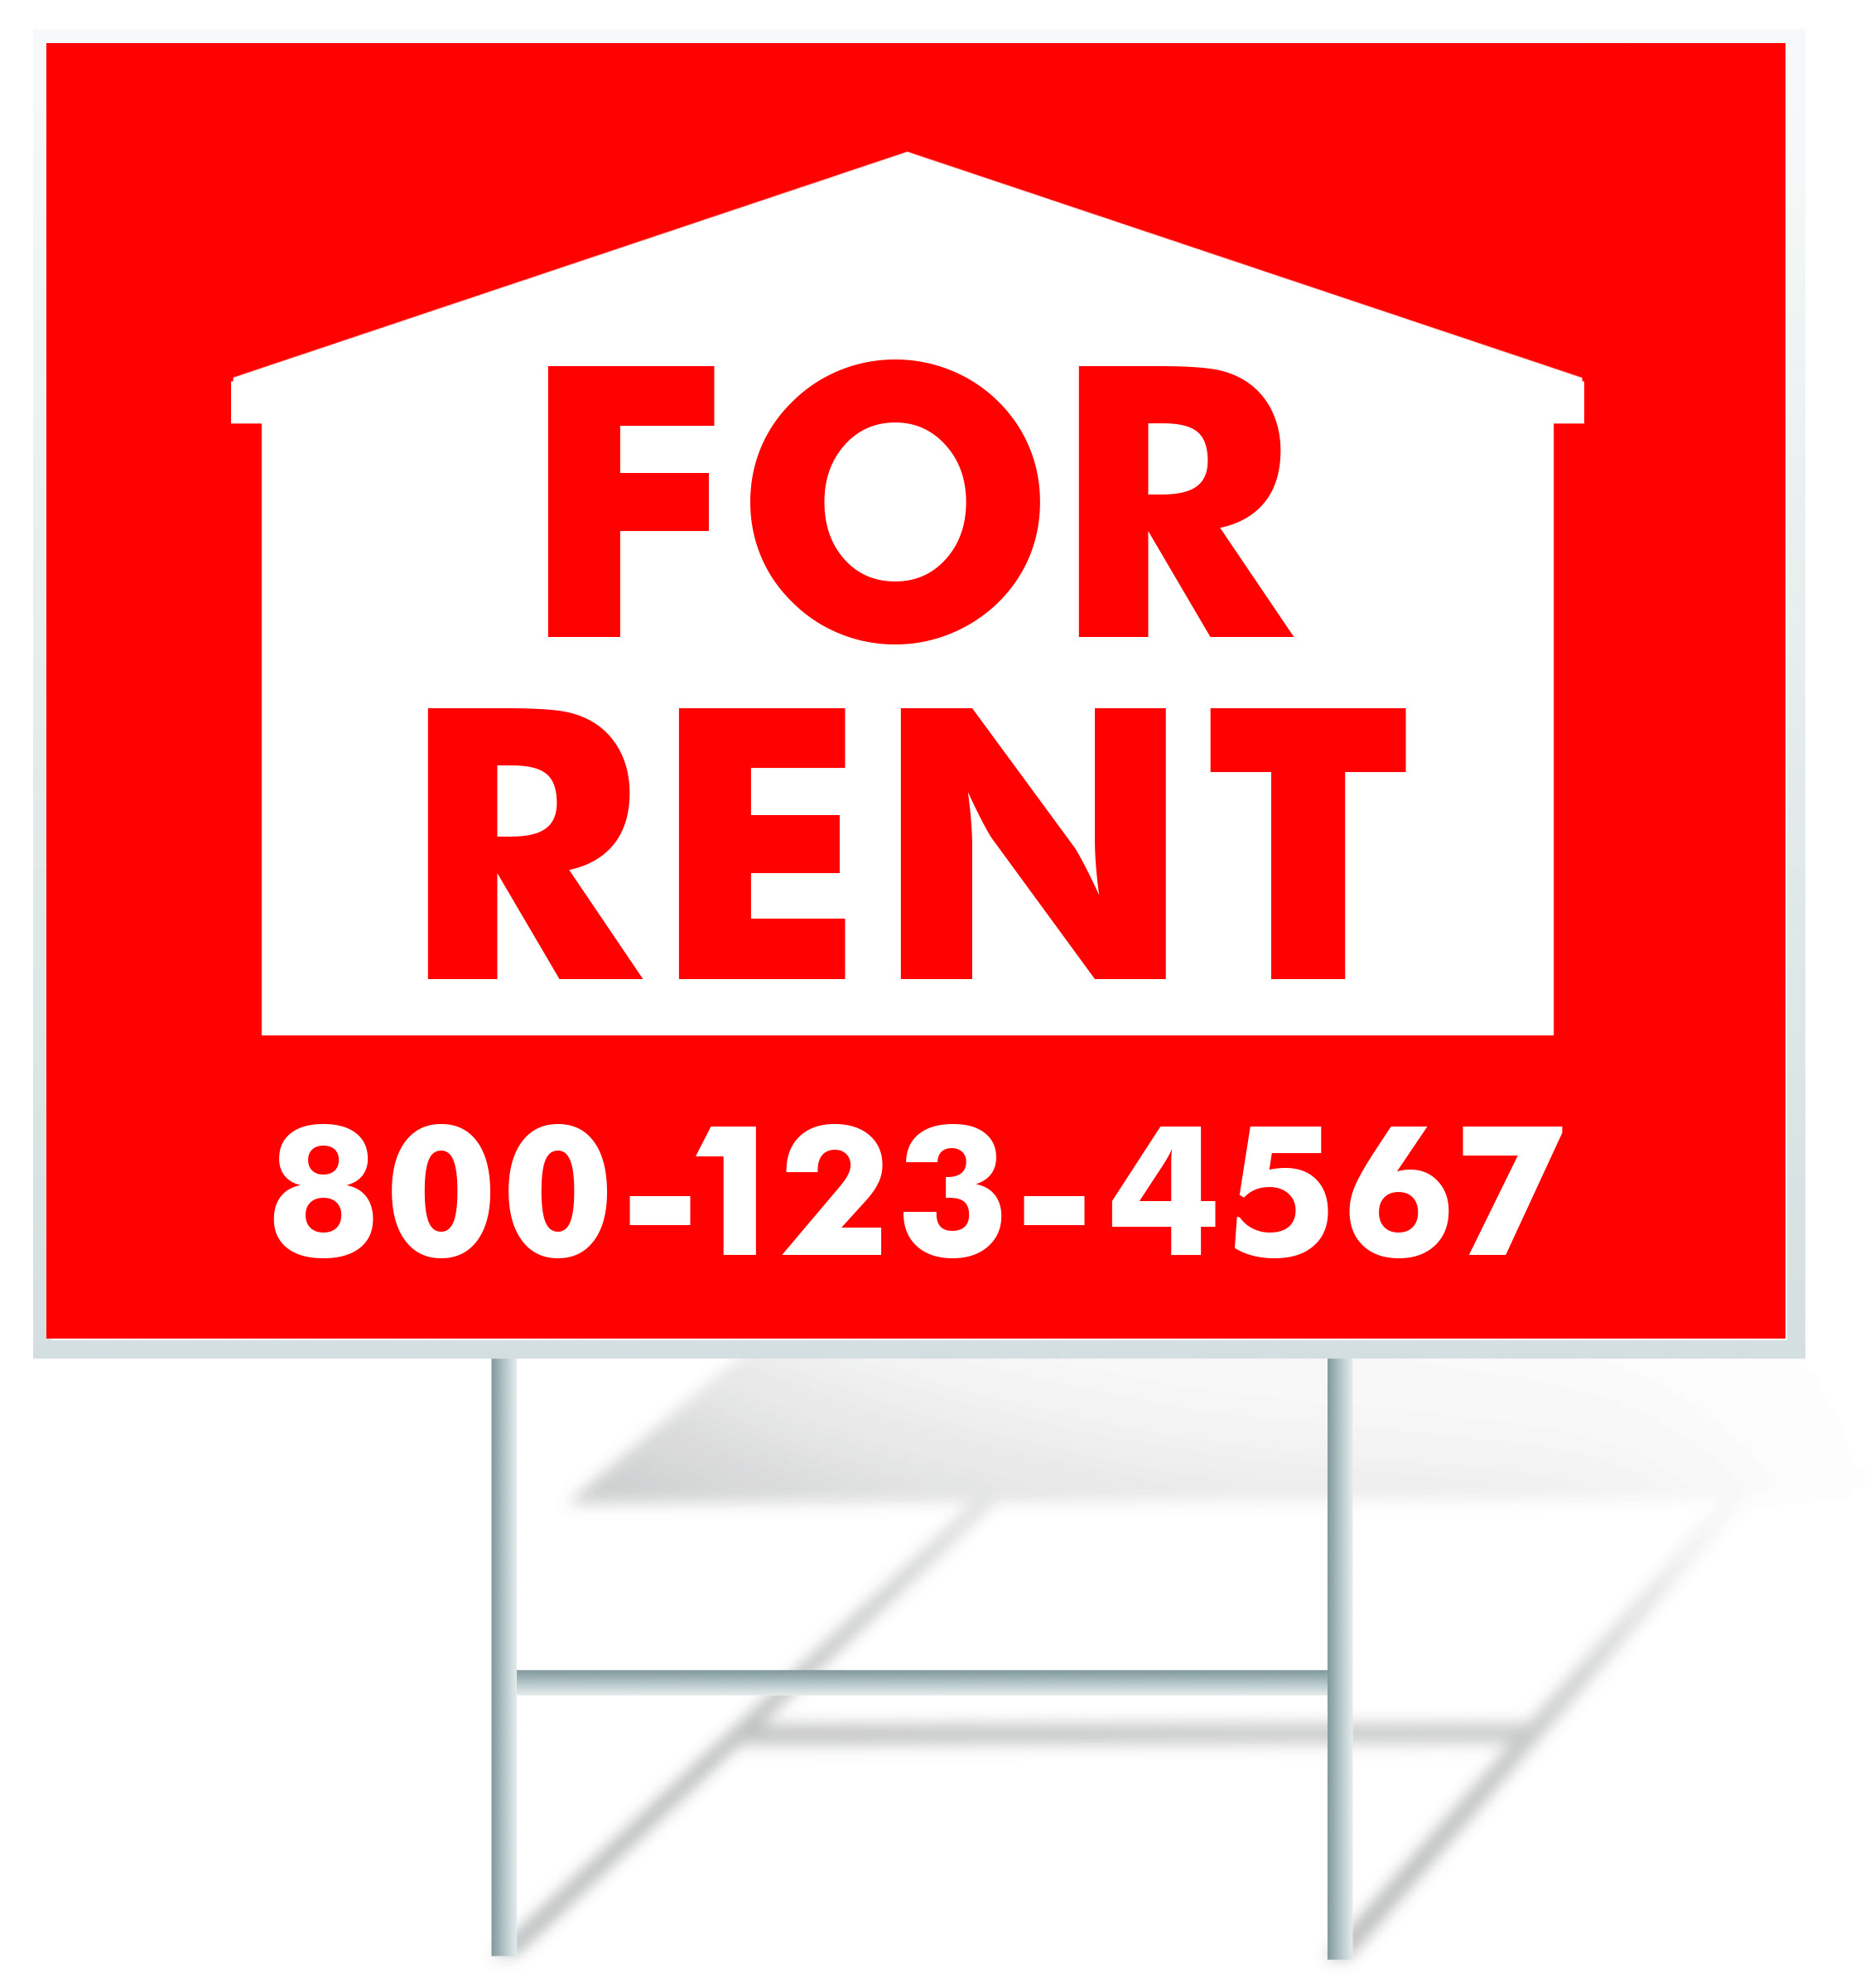 For Rent Lawn Sign Example | LawnSigns.com